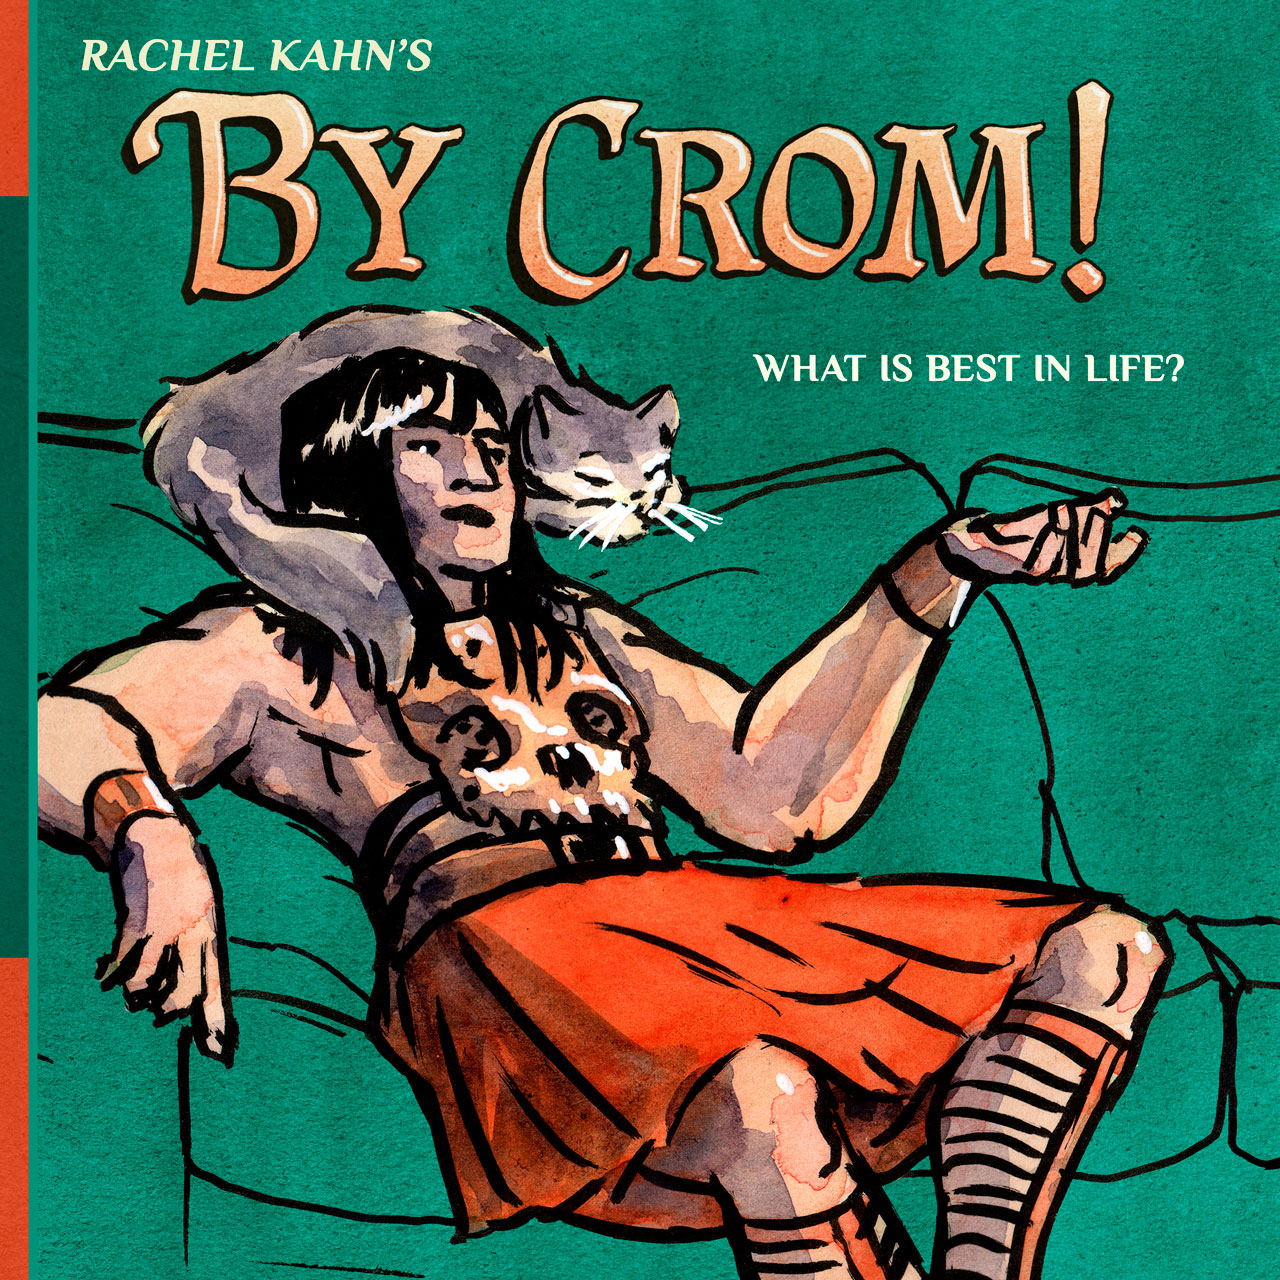 By Crom! – Life Advice from Conan the Barbarian